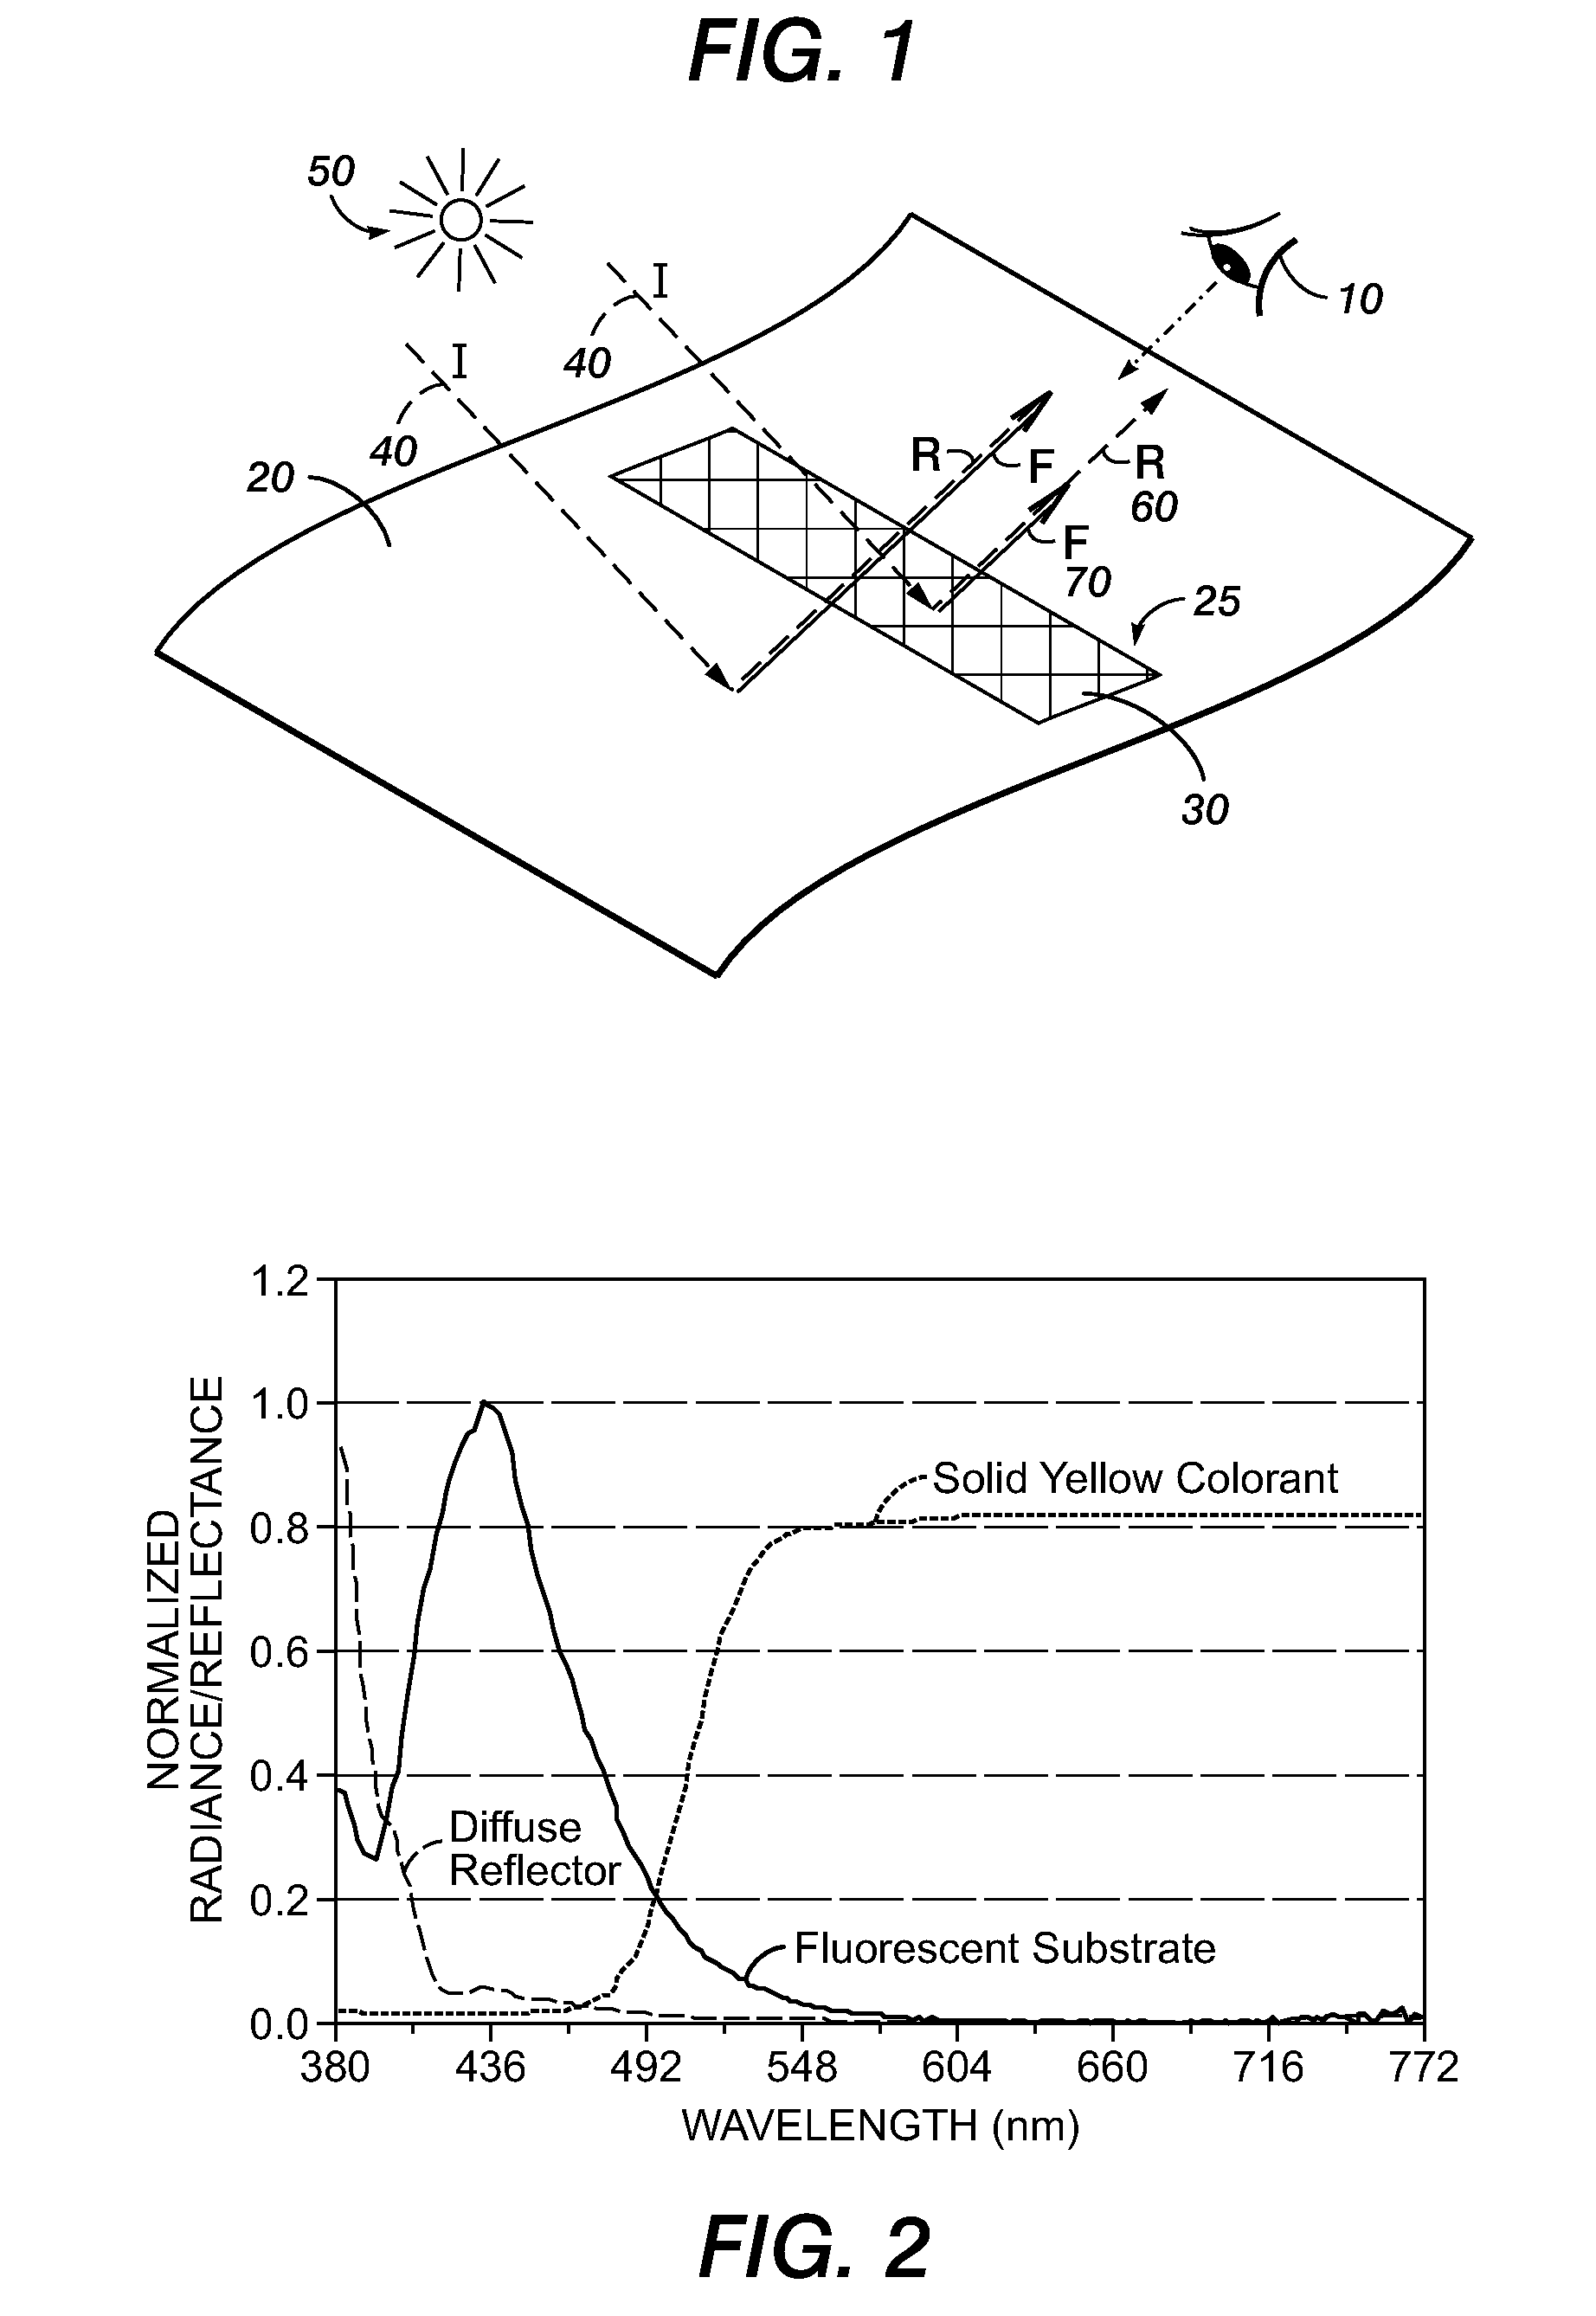 Substrate fluorescence pattern mask for embedding information in printed documents